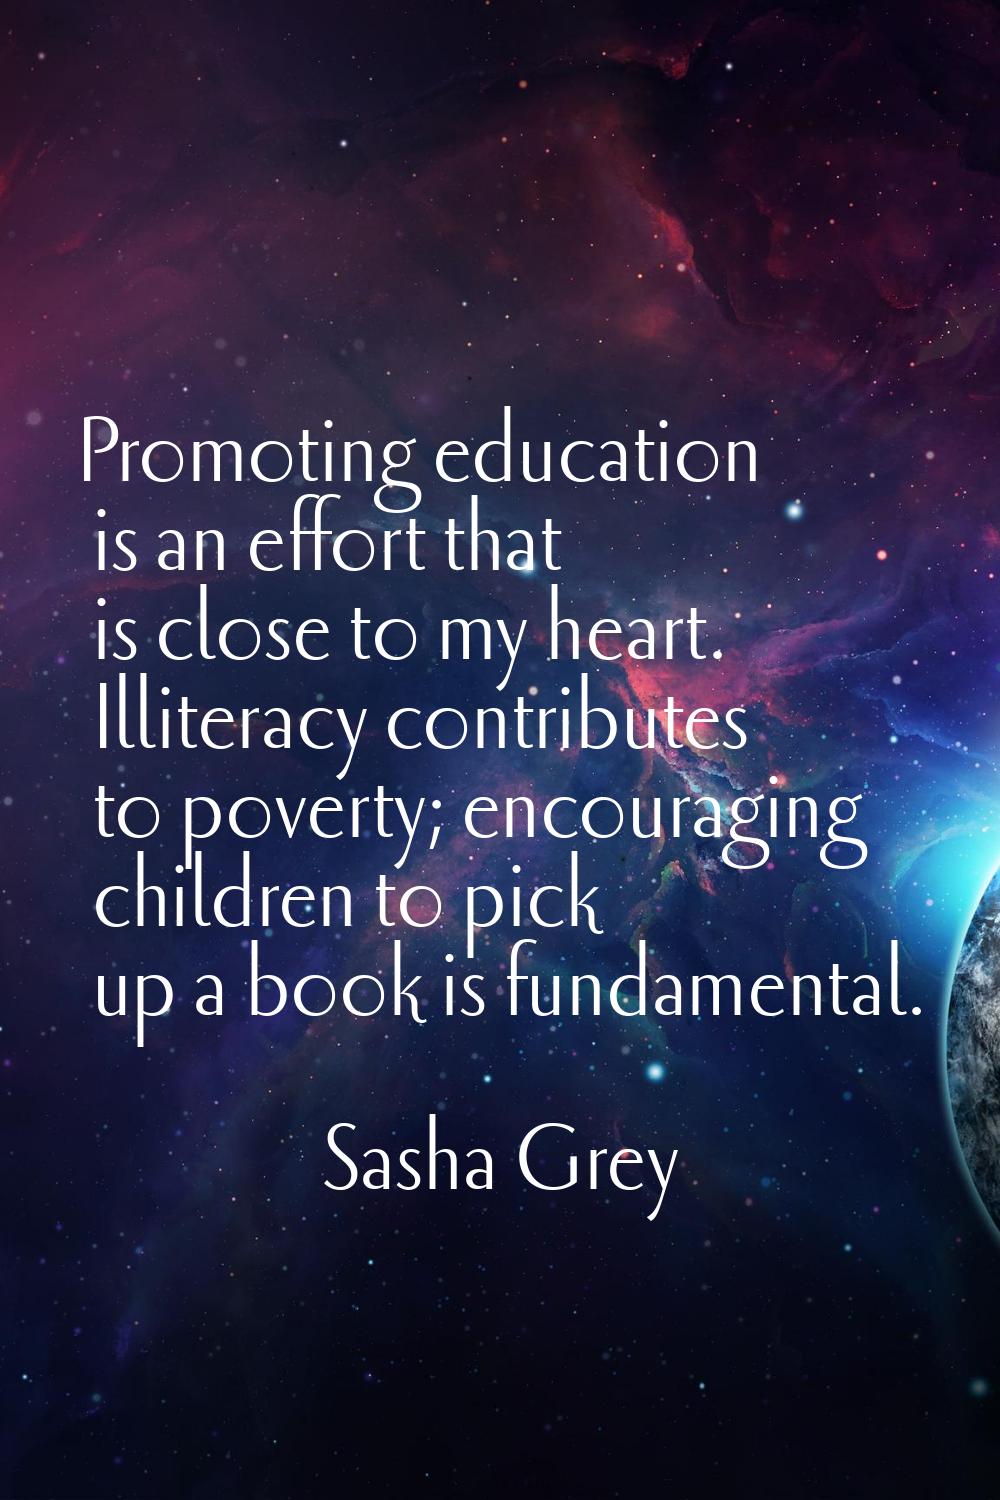 Promoting education is an effort that is close to my heart. Illiteracy contributes to poverty; enco